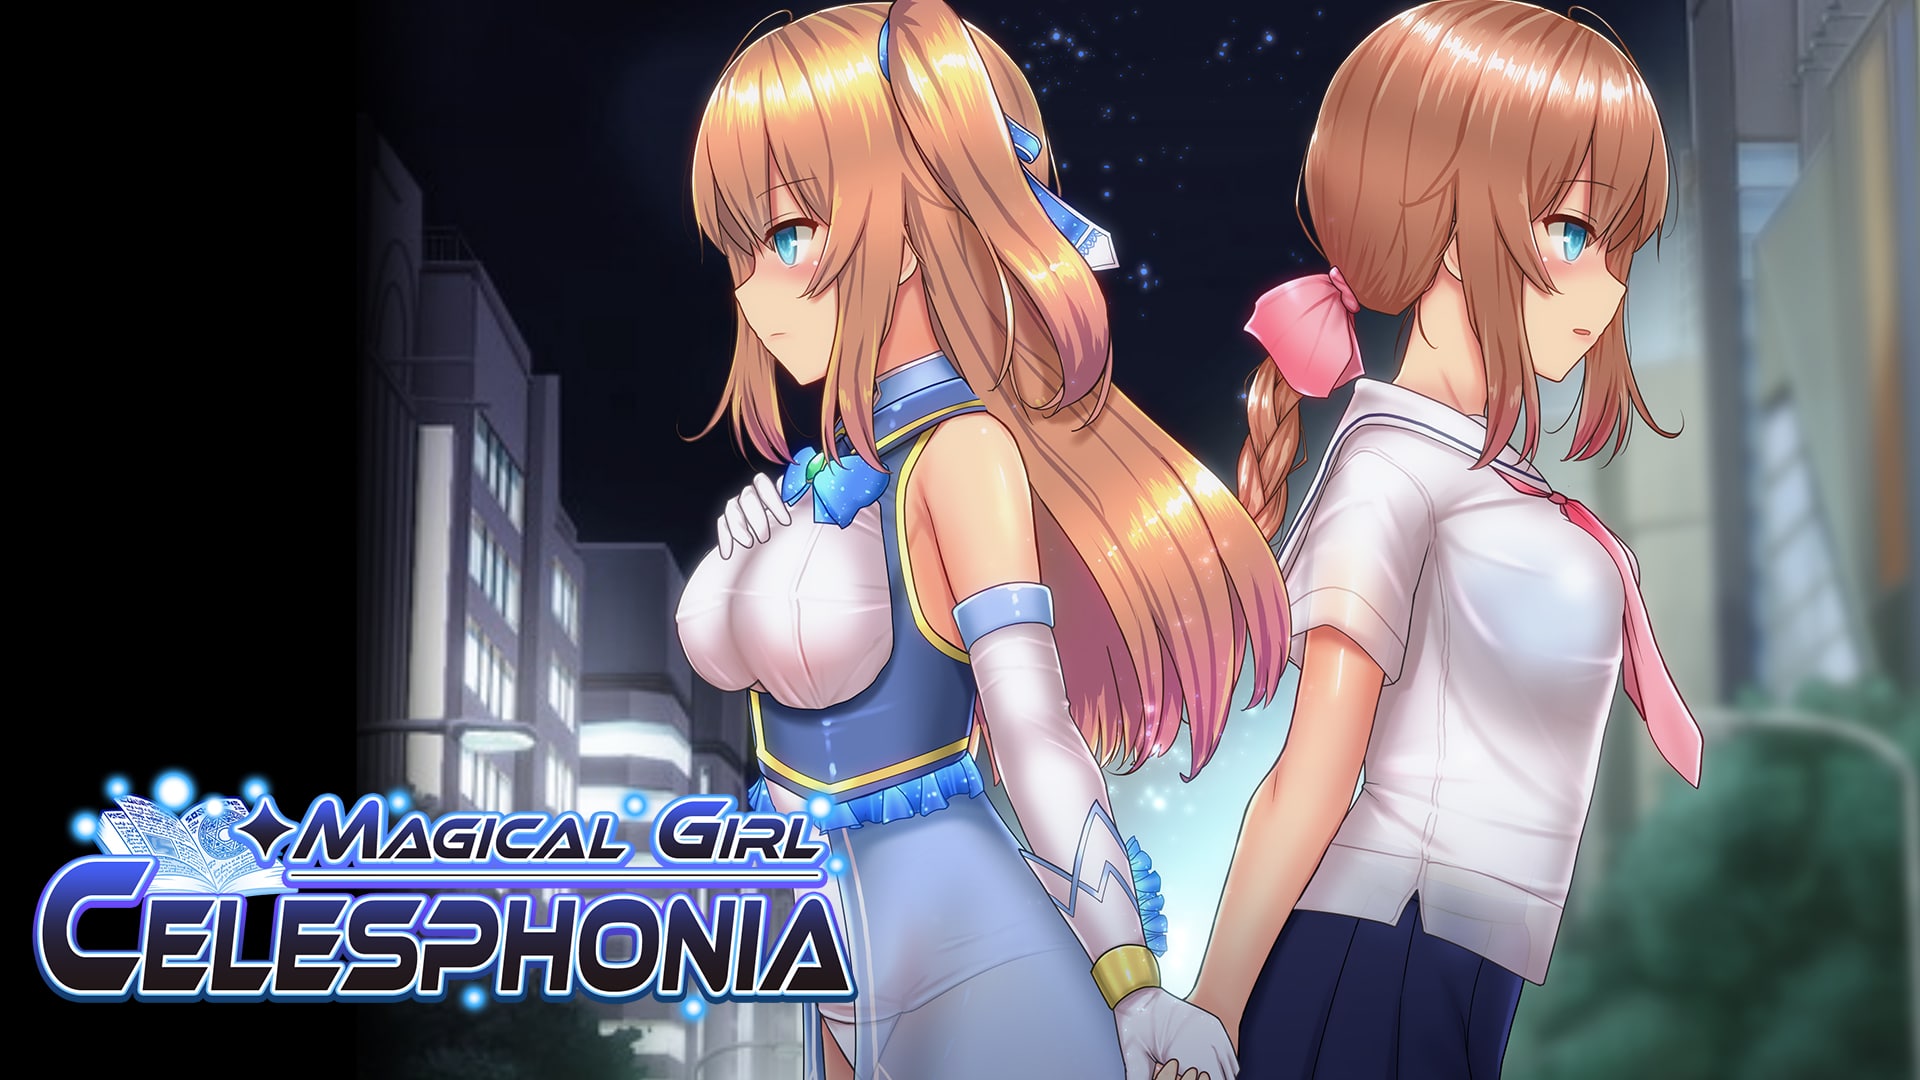 Doujin RPG ‘Magical Girl Celesphonia’ Coming West to PC